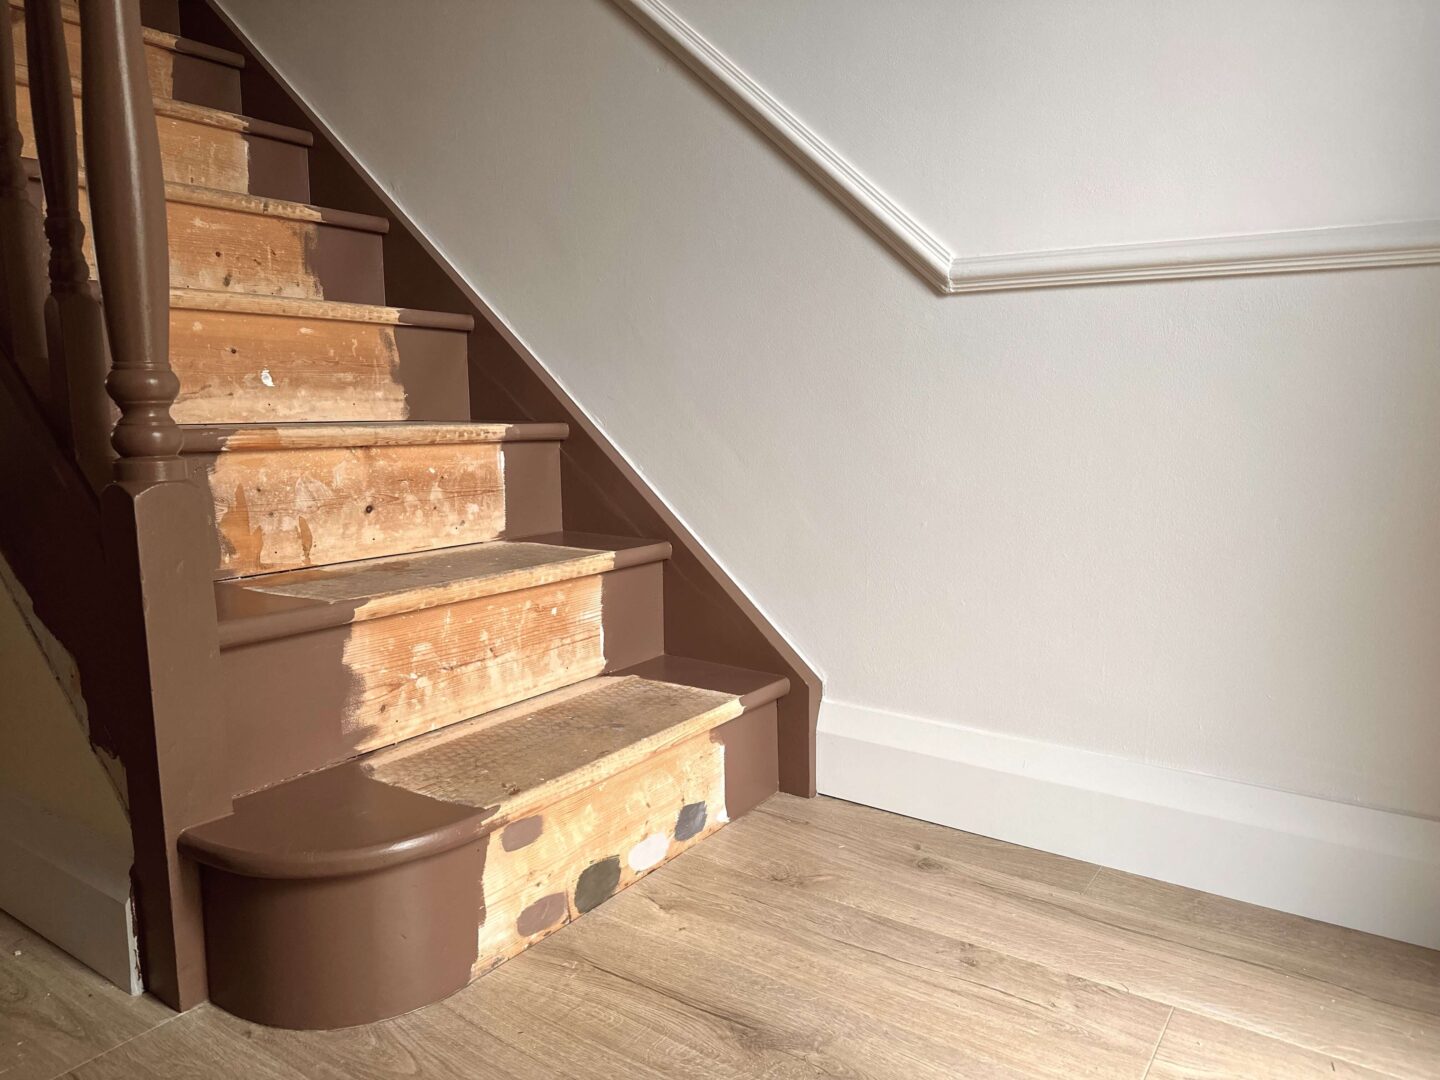 A hallway renovation showing a newly painted brown stairs, ready for a runner. The wall has a dado rail. Above the dado rail is painted white and below the dado rail is painted a warm, light greige.